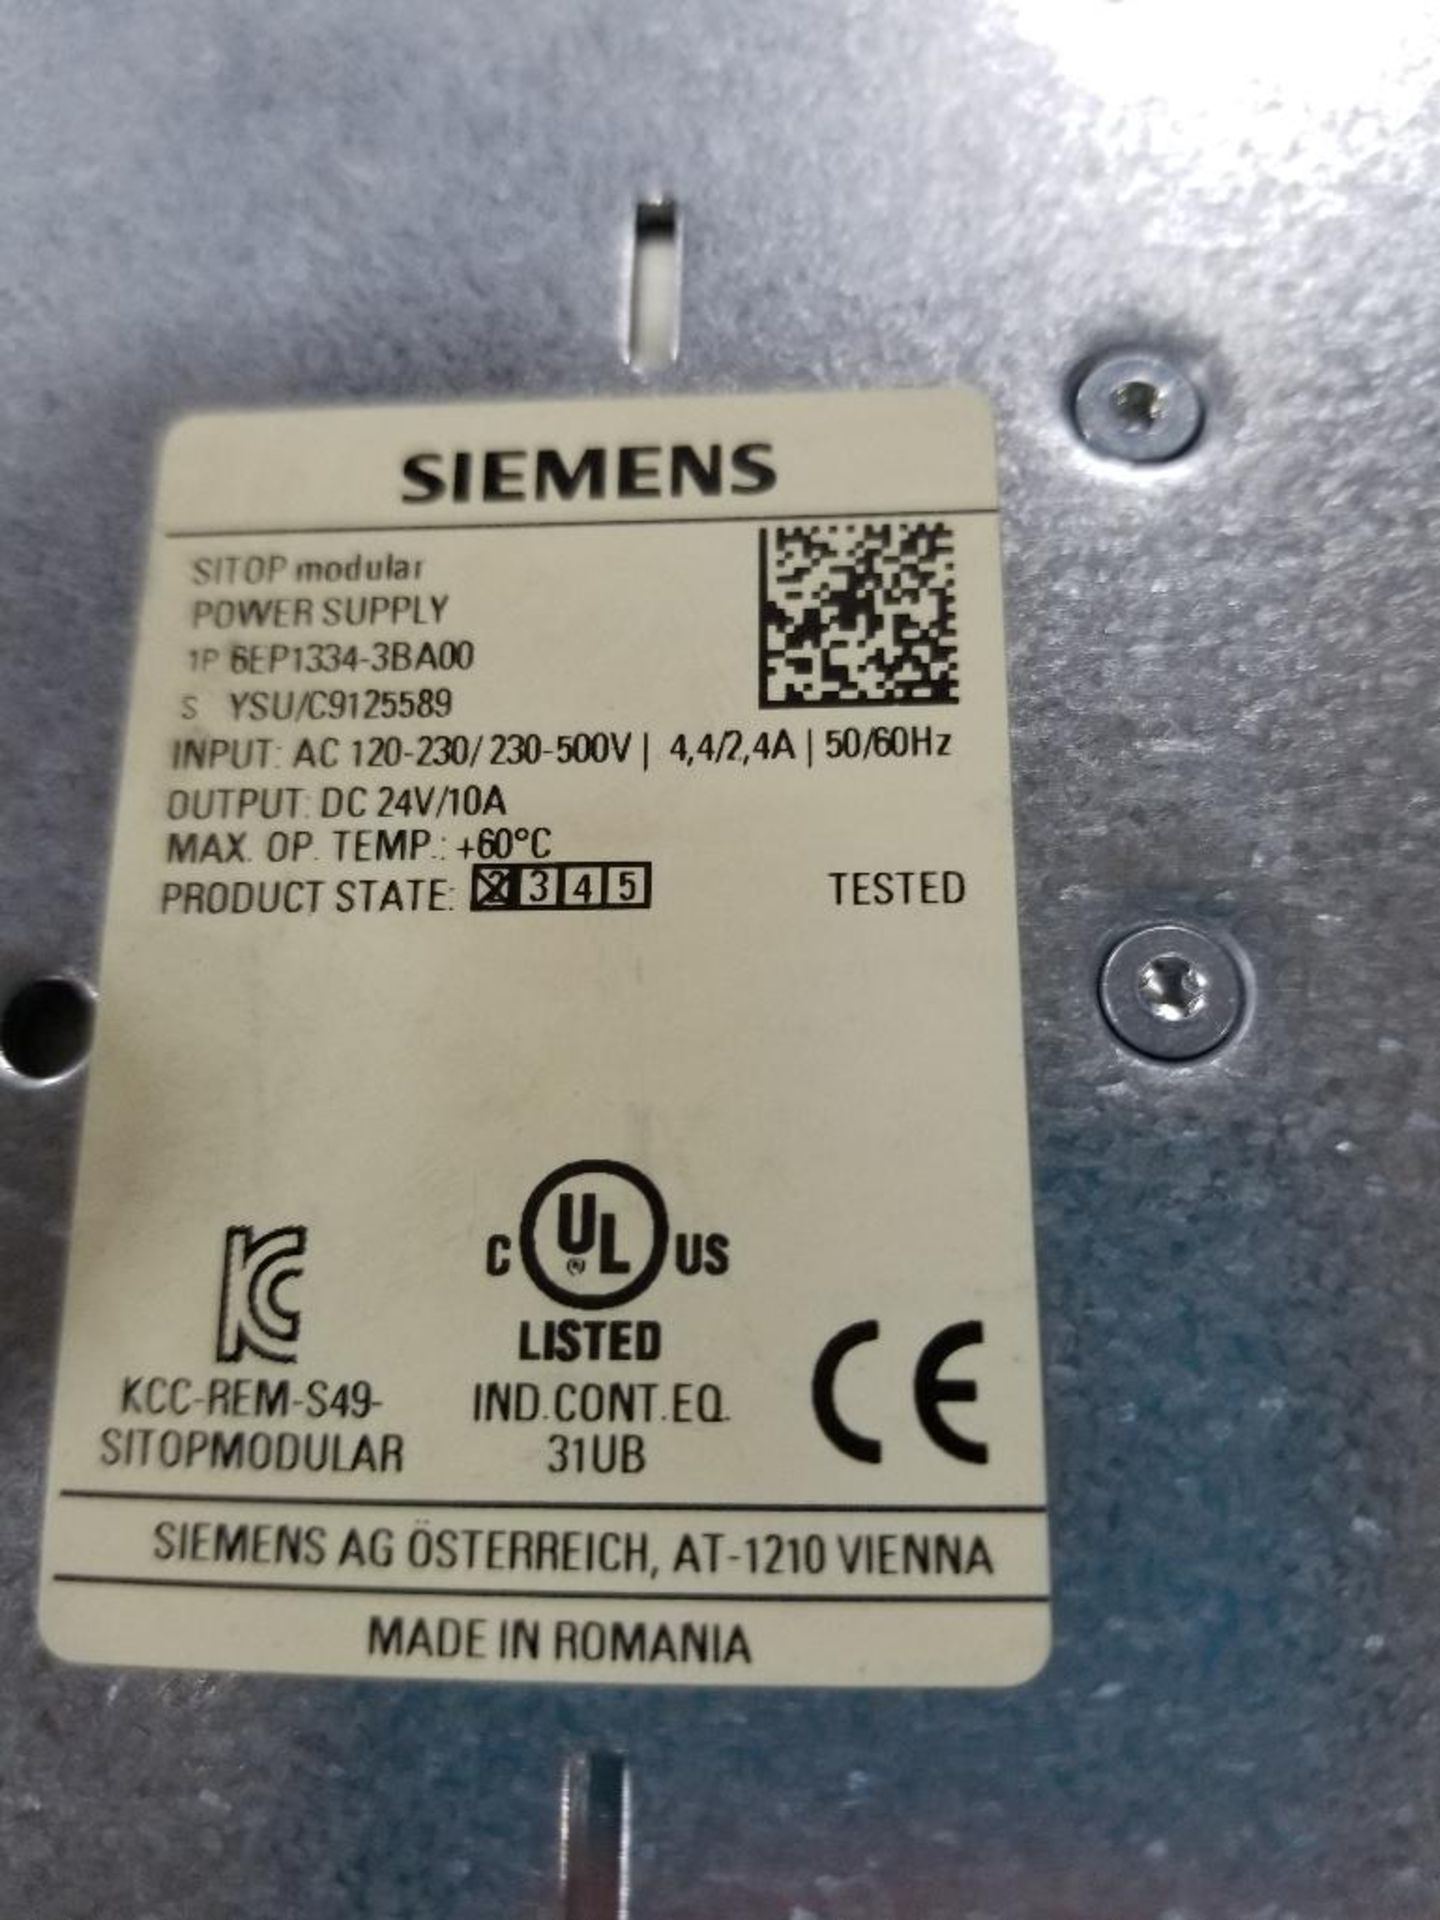 Qty 3 - Siemens Sitop power supply. Part number 6EP1334-3BA00. - Image 3 of 4